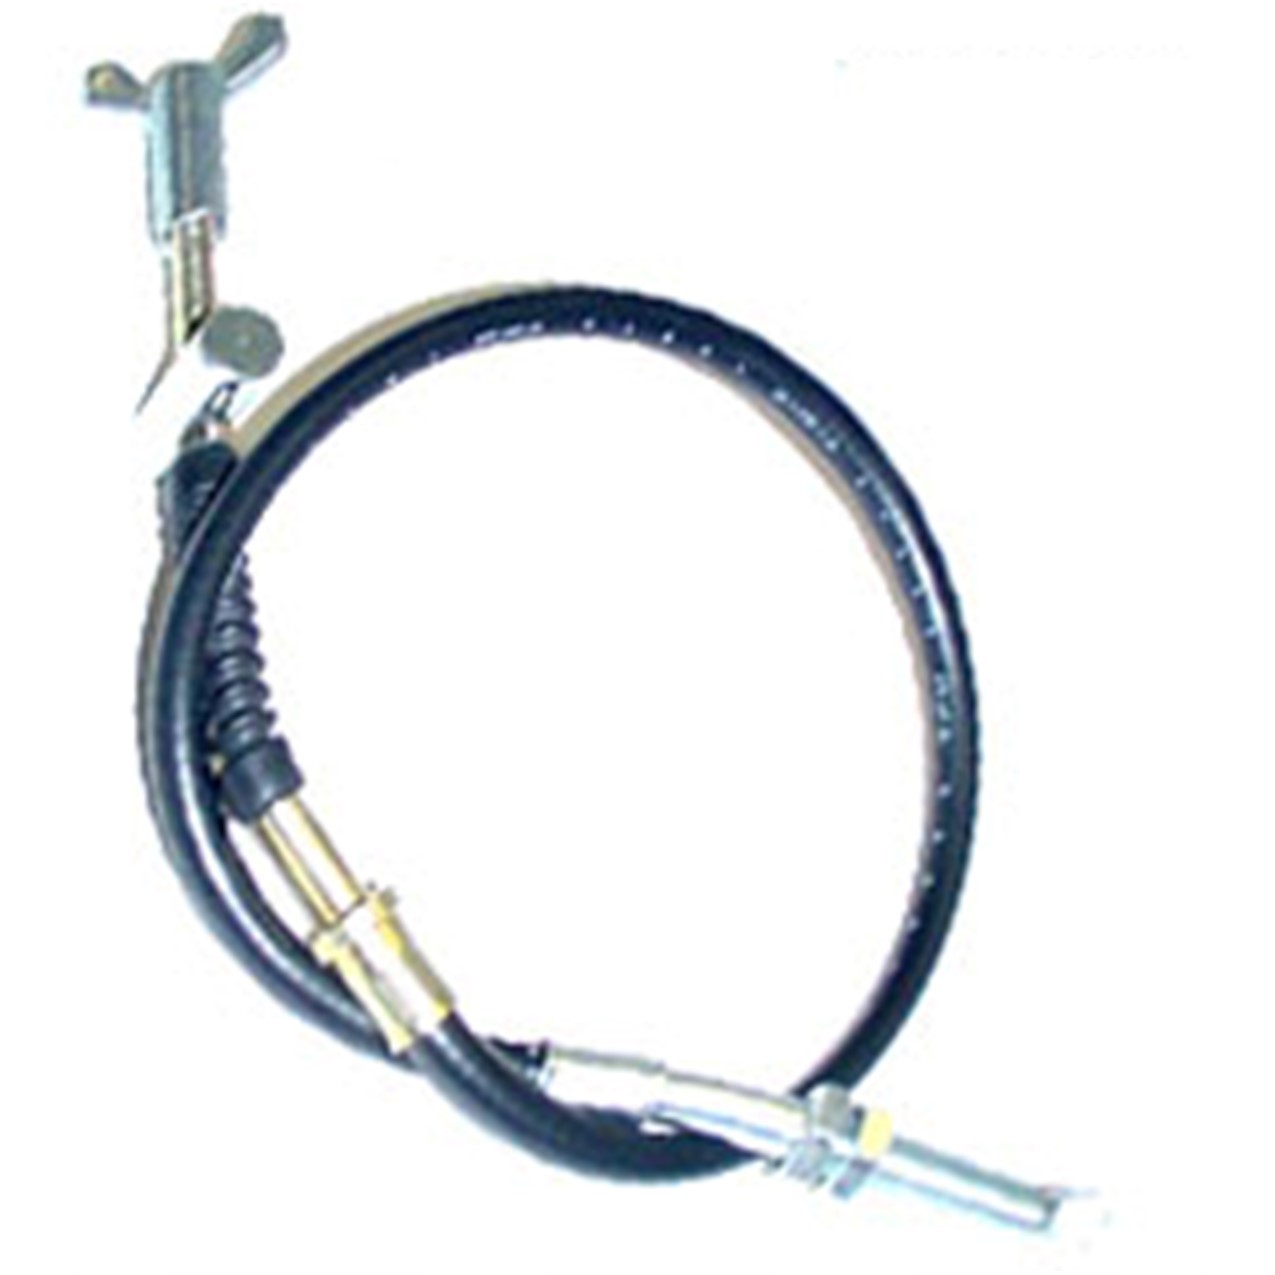 Foot Brake Cable Fits E-Ton Yukon YXL150, CXL150, Viper RXL150R, ATVs + Others Out=19"/Inner Wire=24" - Click Image to Close